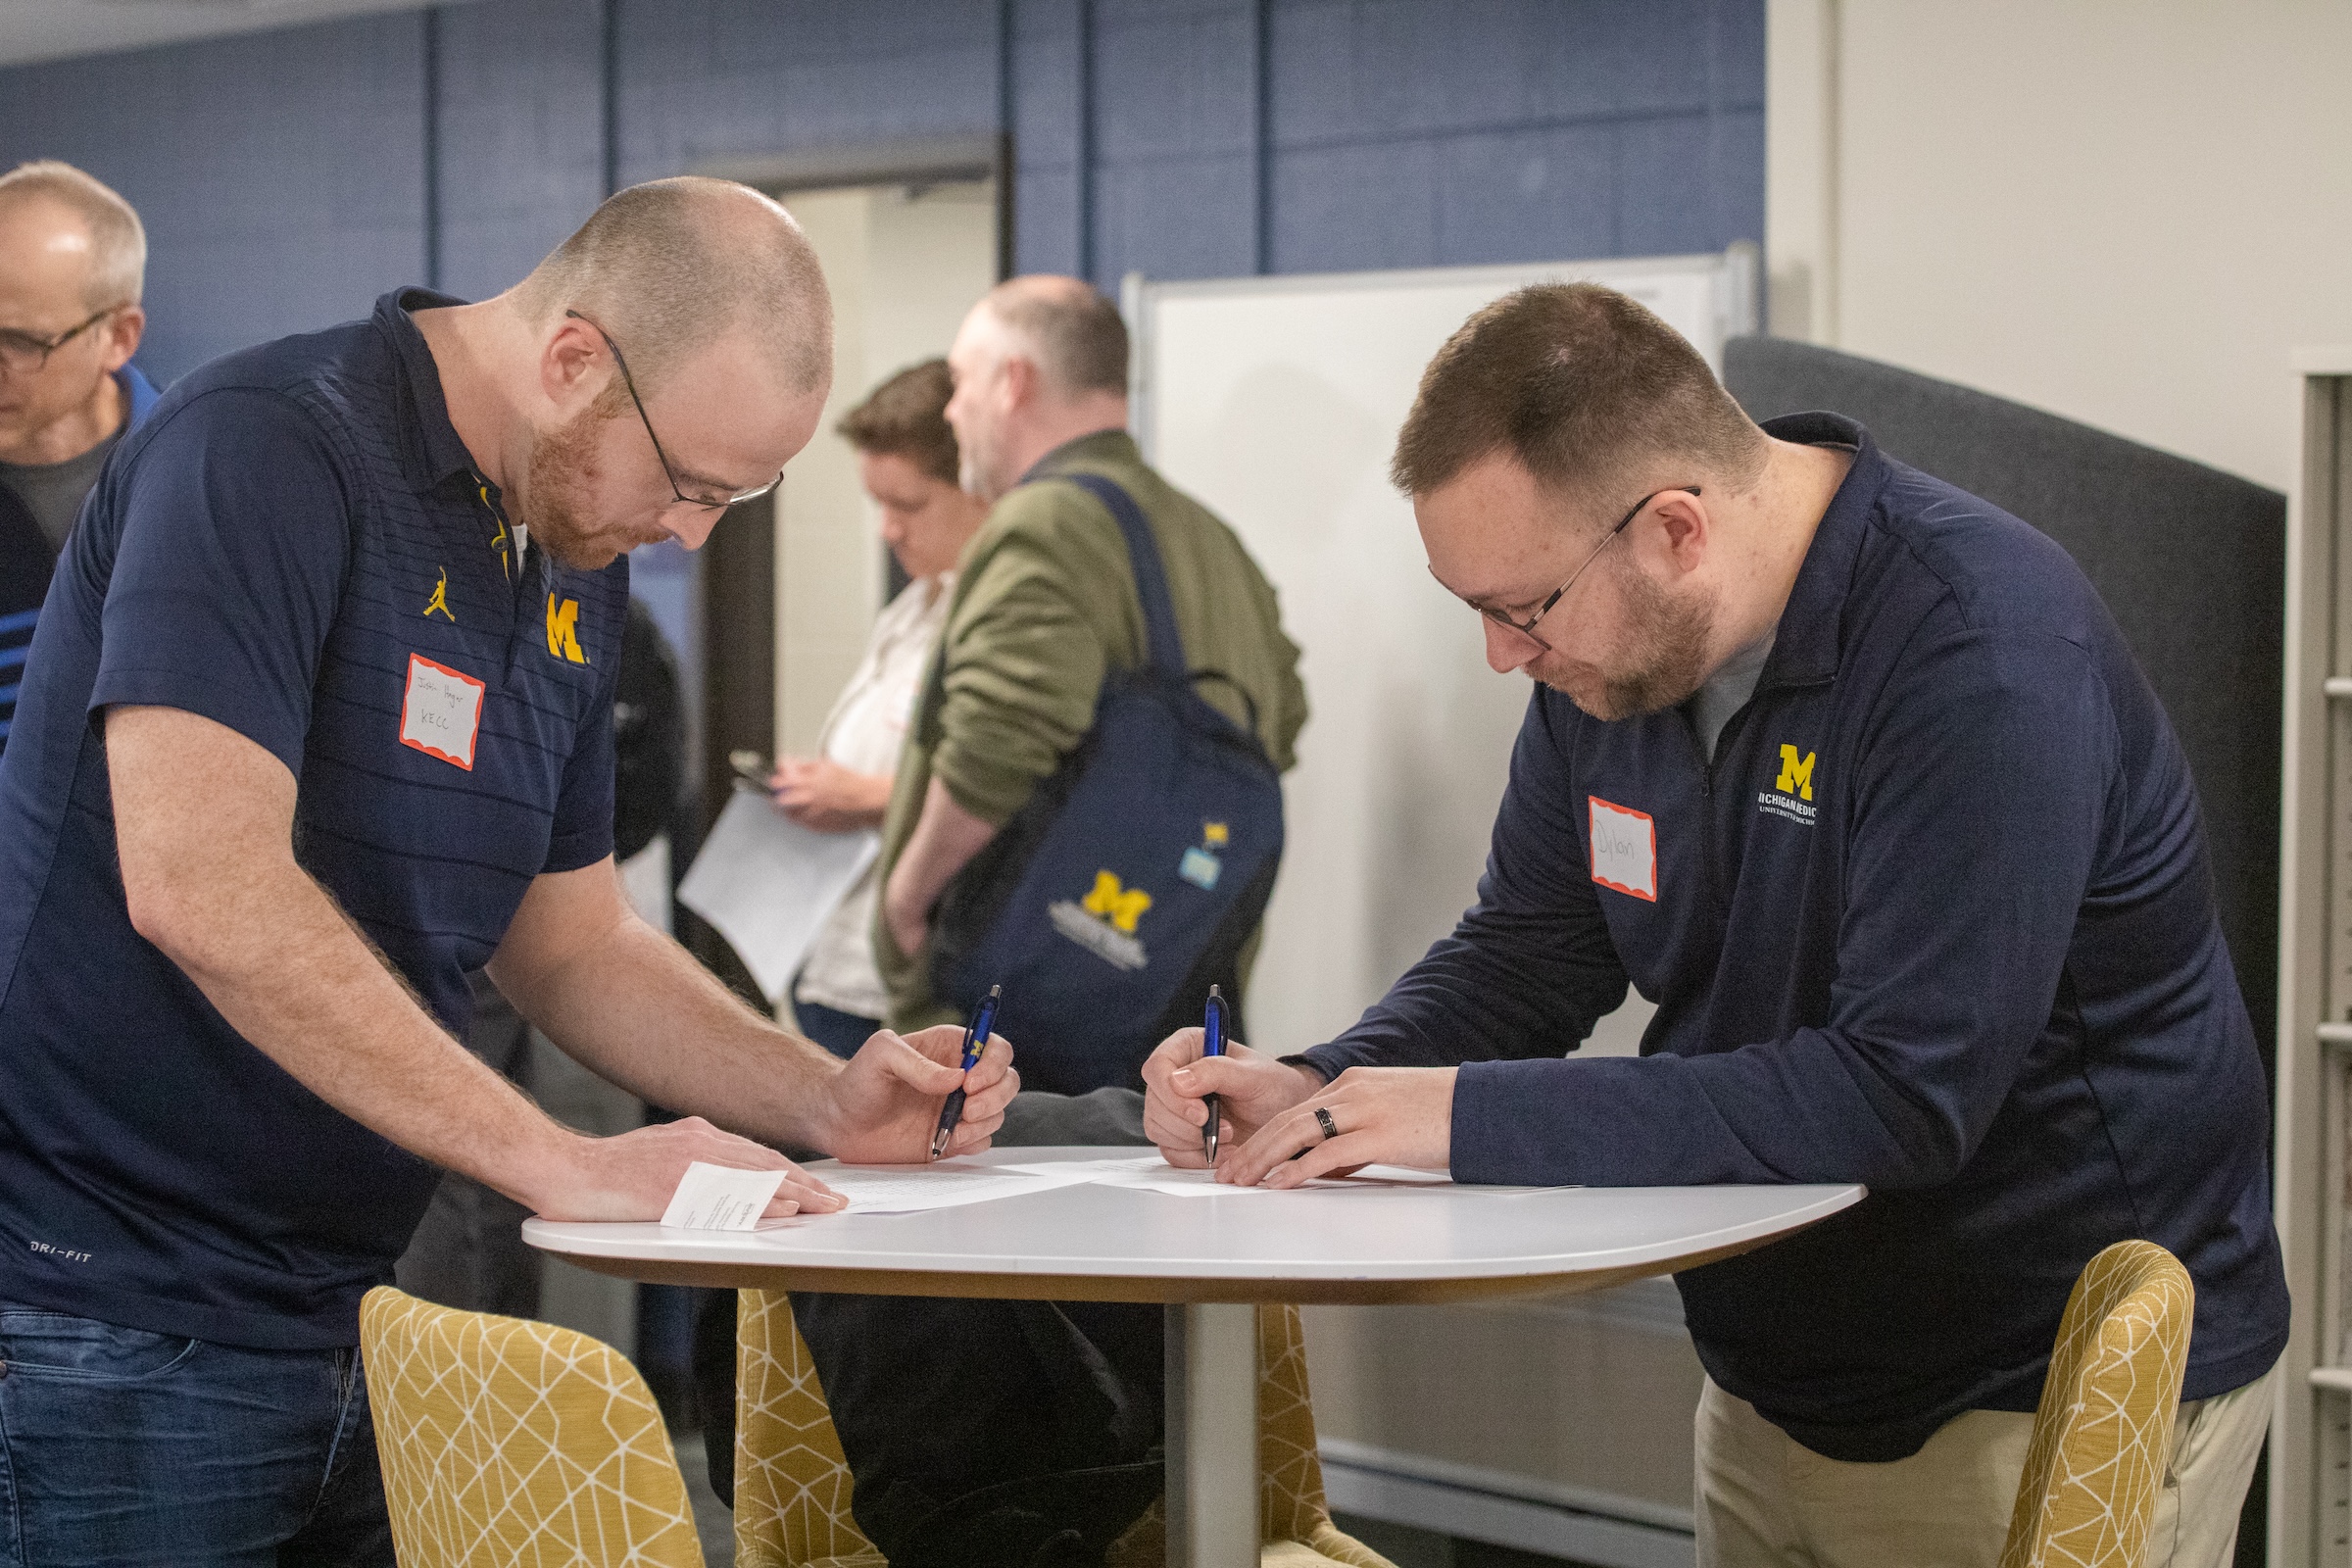 2 men wearing navy blue lean over a small round table, writing on paper.